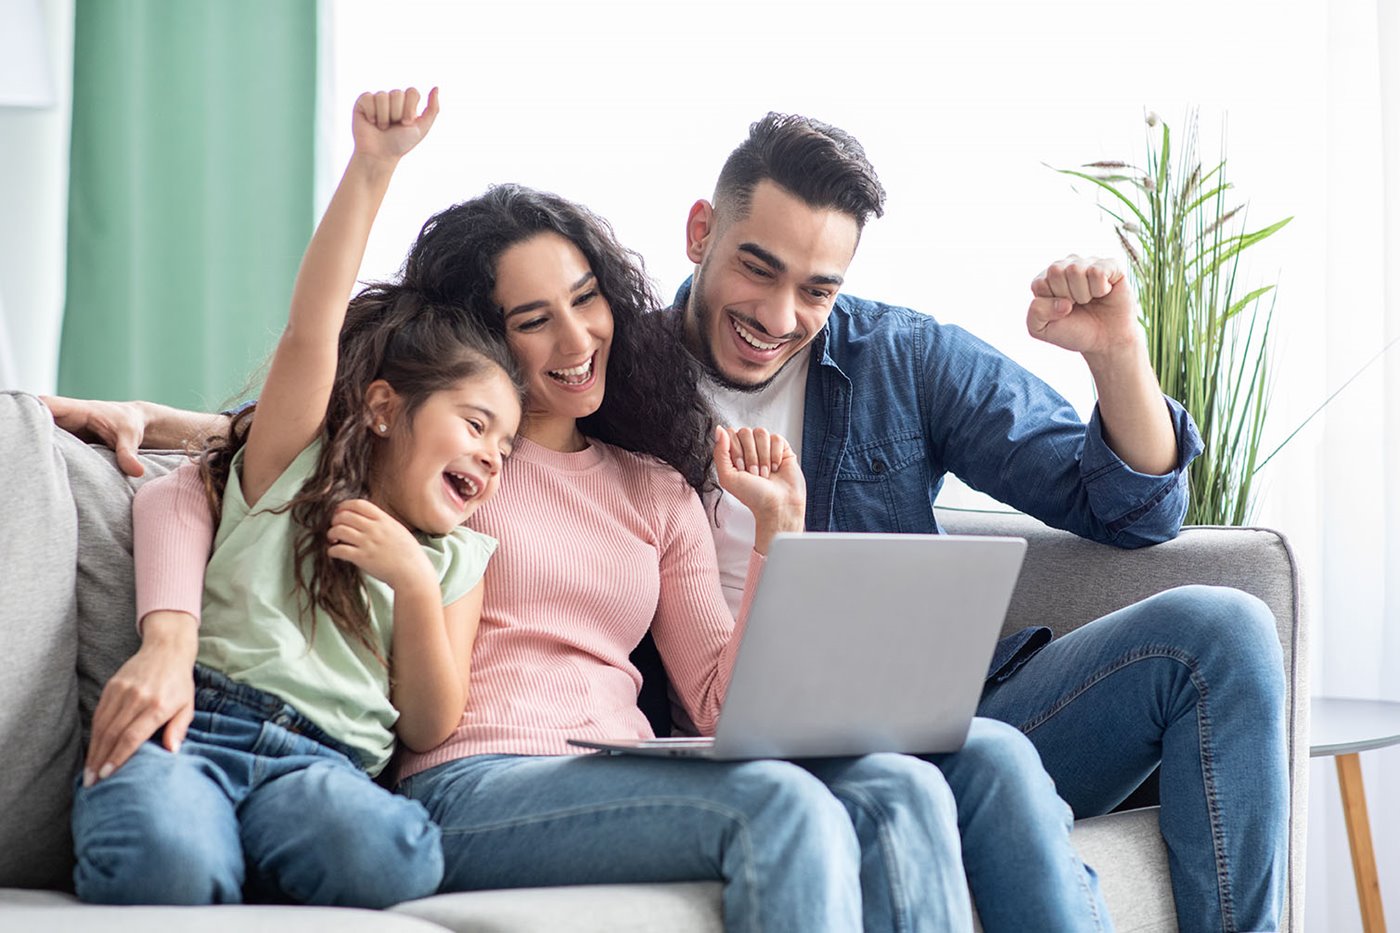 A young family snuggle on the couch while cheering at their laptop